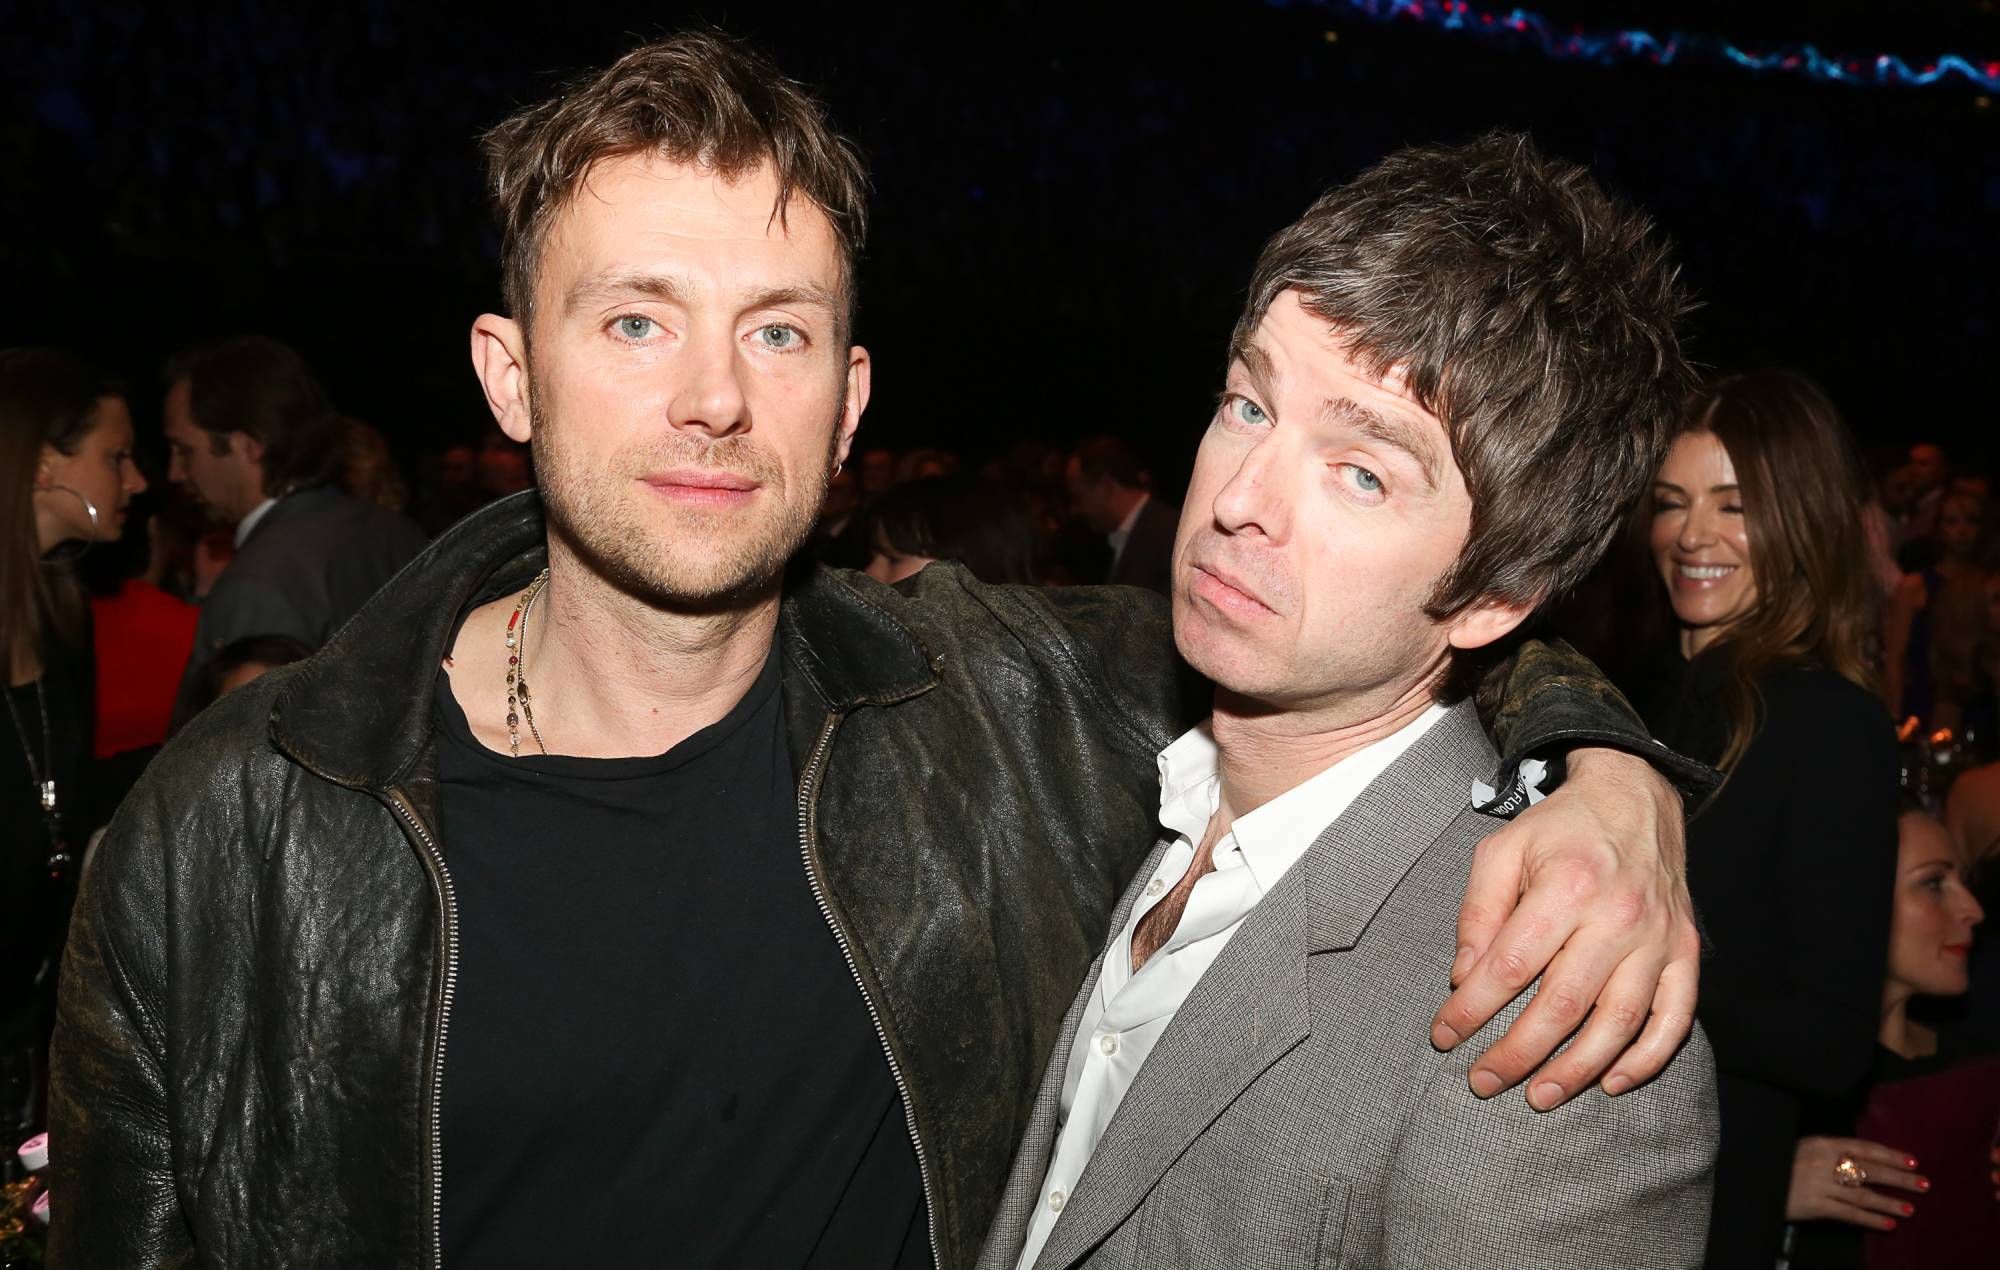 Damon Albarn and Noel Gallagher during The BRIT Awards 2013 at The O2, on February 20, 2013 in London, England. (Photo by JM Enternational/Redferns)